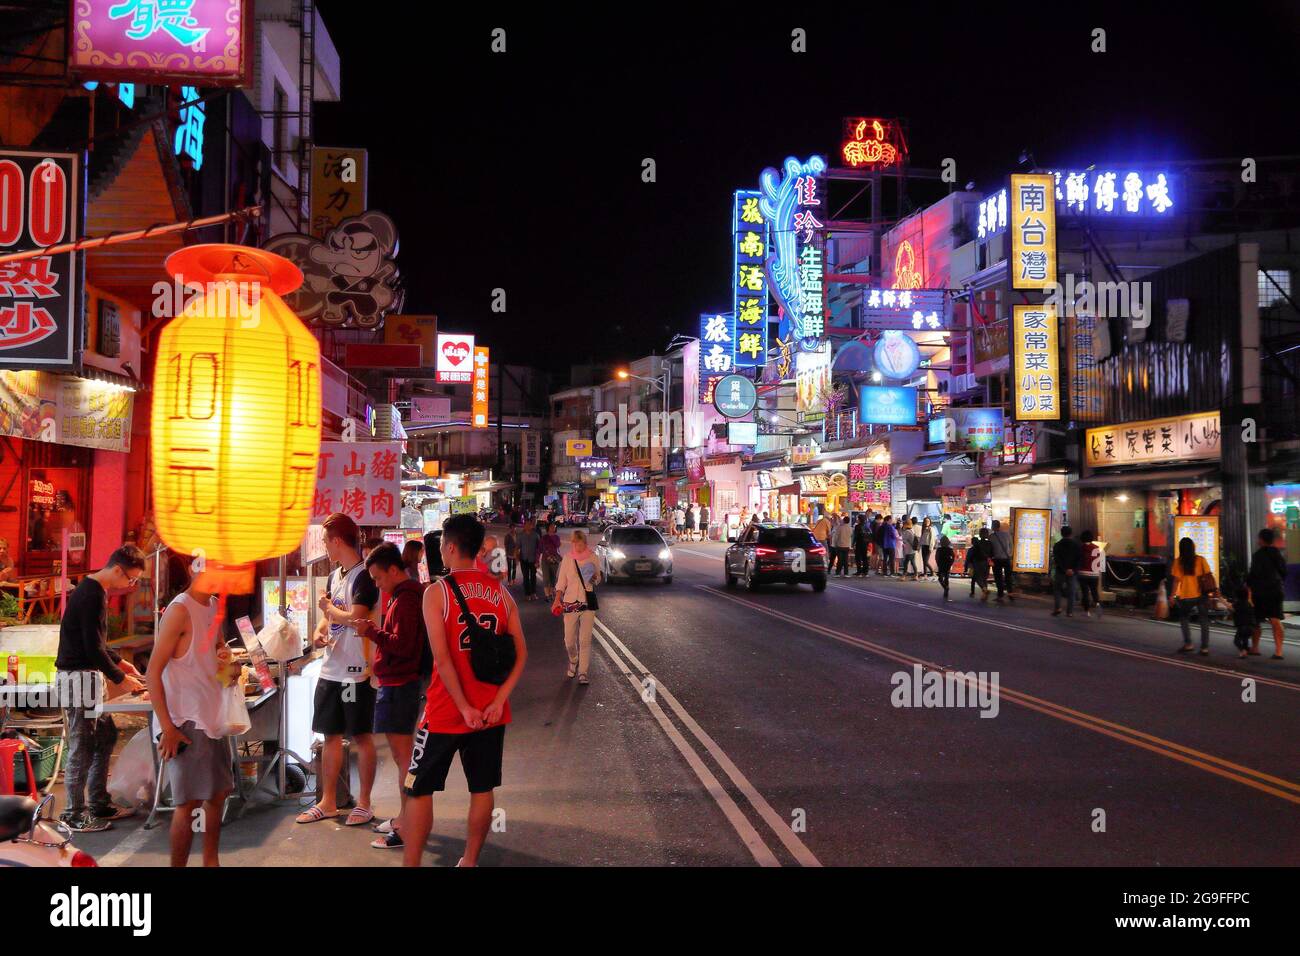 KENTING, TAIWAN - NOVEMBER 26, 2018: People visit Kenting Street Night Market in Taiwan. Night food markets are a big part of Taiwanese culture. Stock Photo